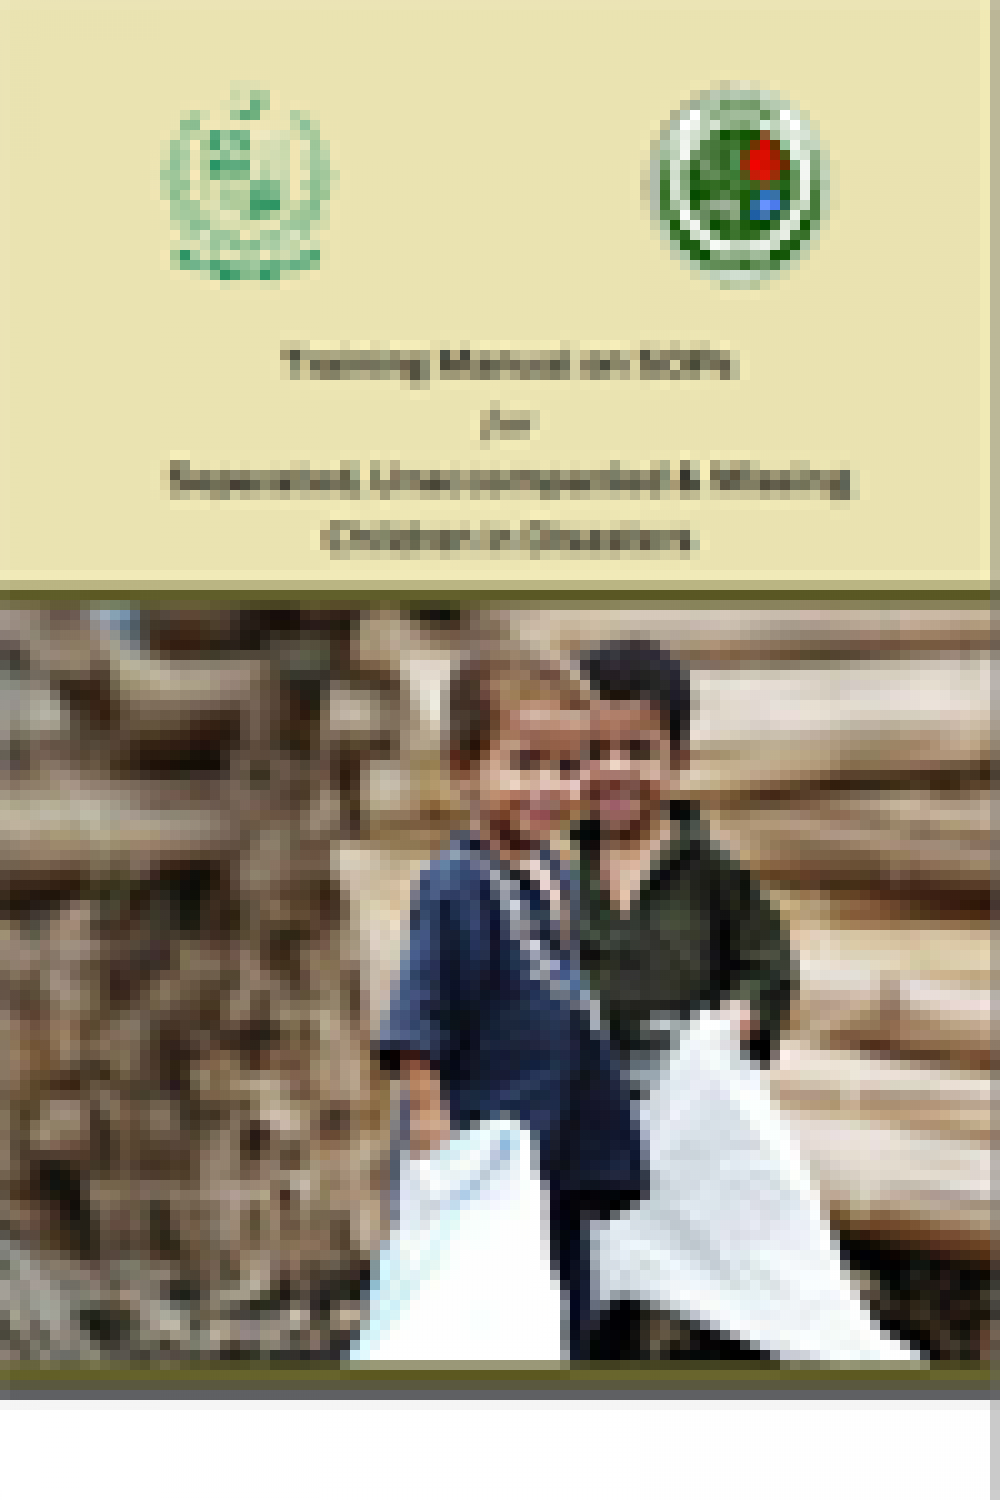 Training Manual on SOPs for Separated, Unaccompanied & Missing Children in Disasters